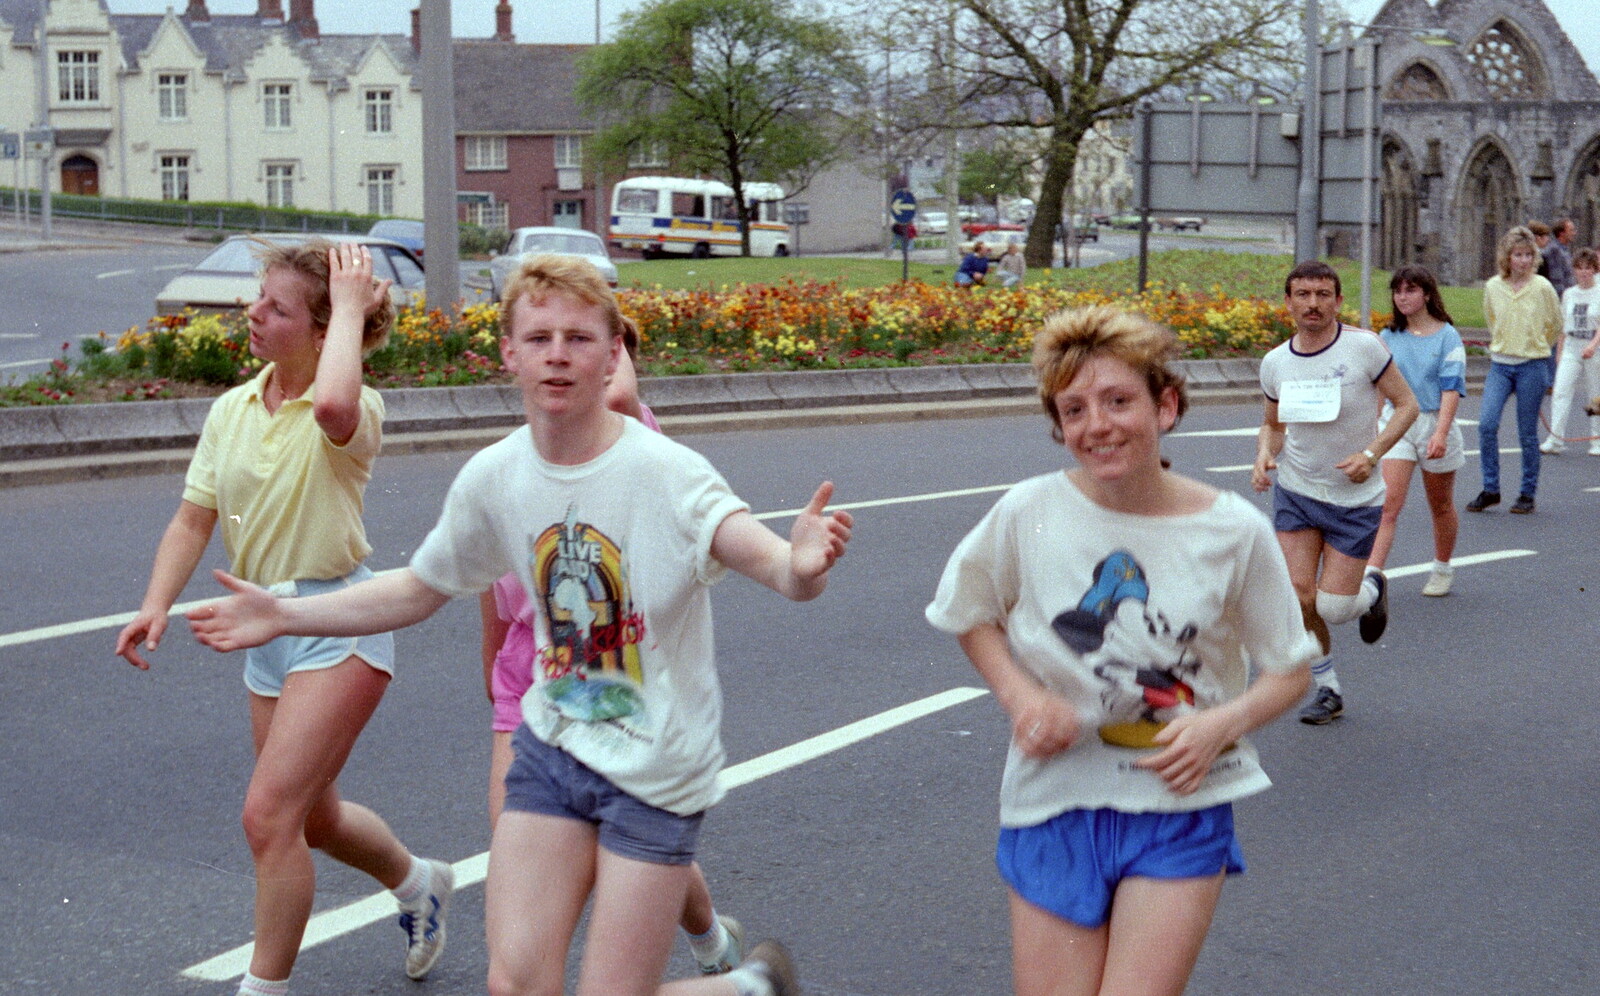 More of the Psychology group at Charles Church from Uni: Sport Aid - Run The World, Plymouth, Devon - 25th May 1986